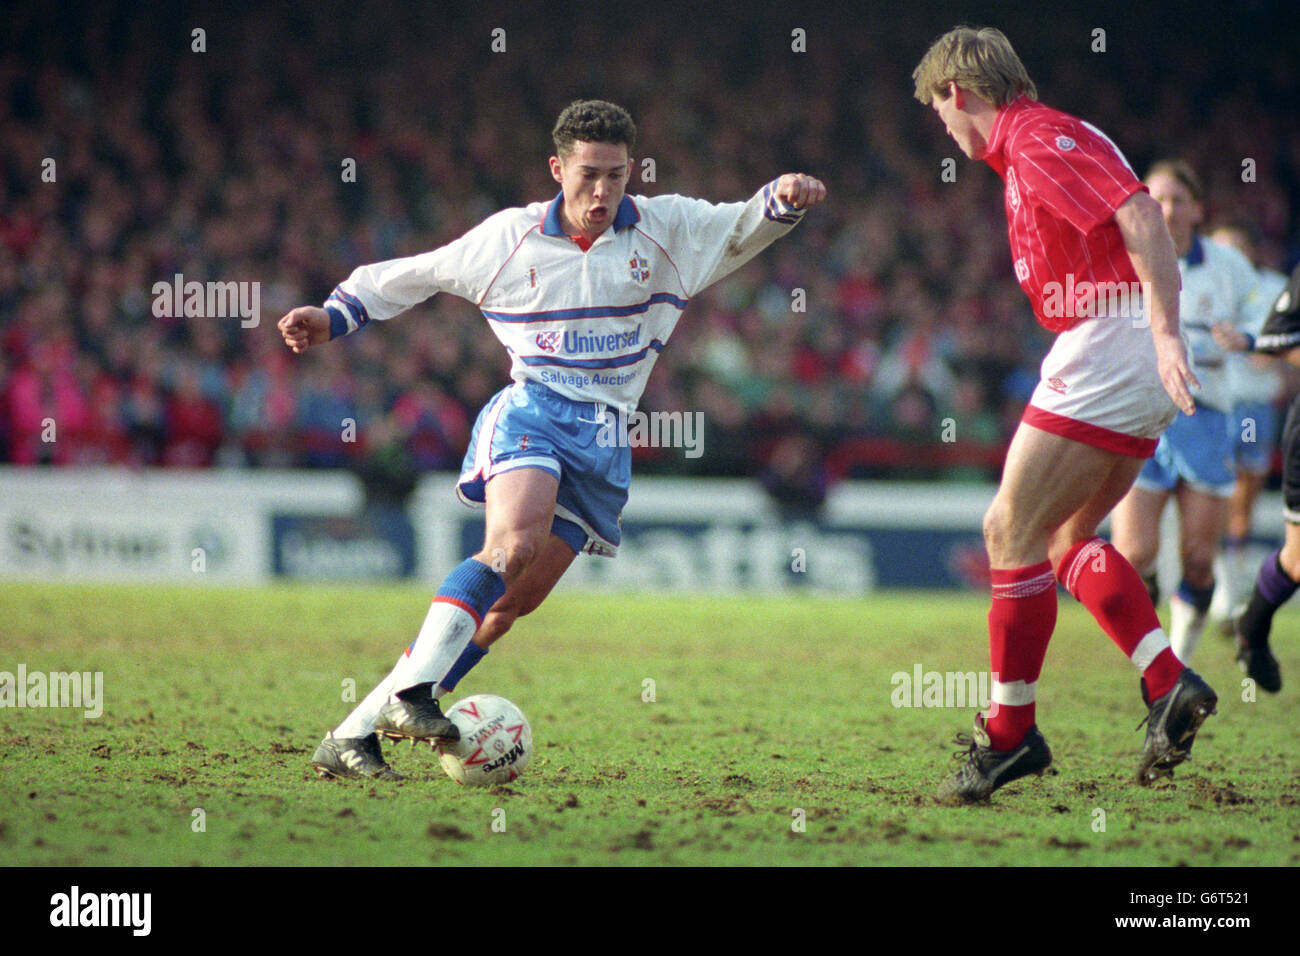 Soccer - Endsleigh League Division One - Nottingham Forest v Luton Town - The City Ground. Luton Town's Paul Telfer comes up against Nottingham Forest's Stuart Pearce. Stock Photo